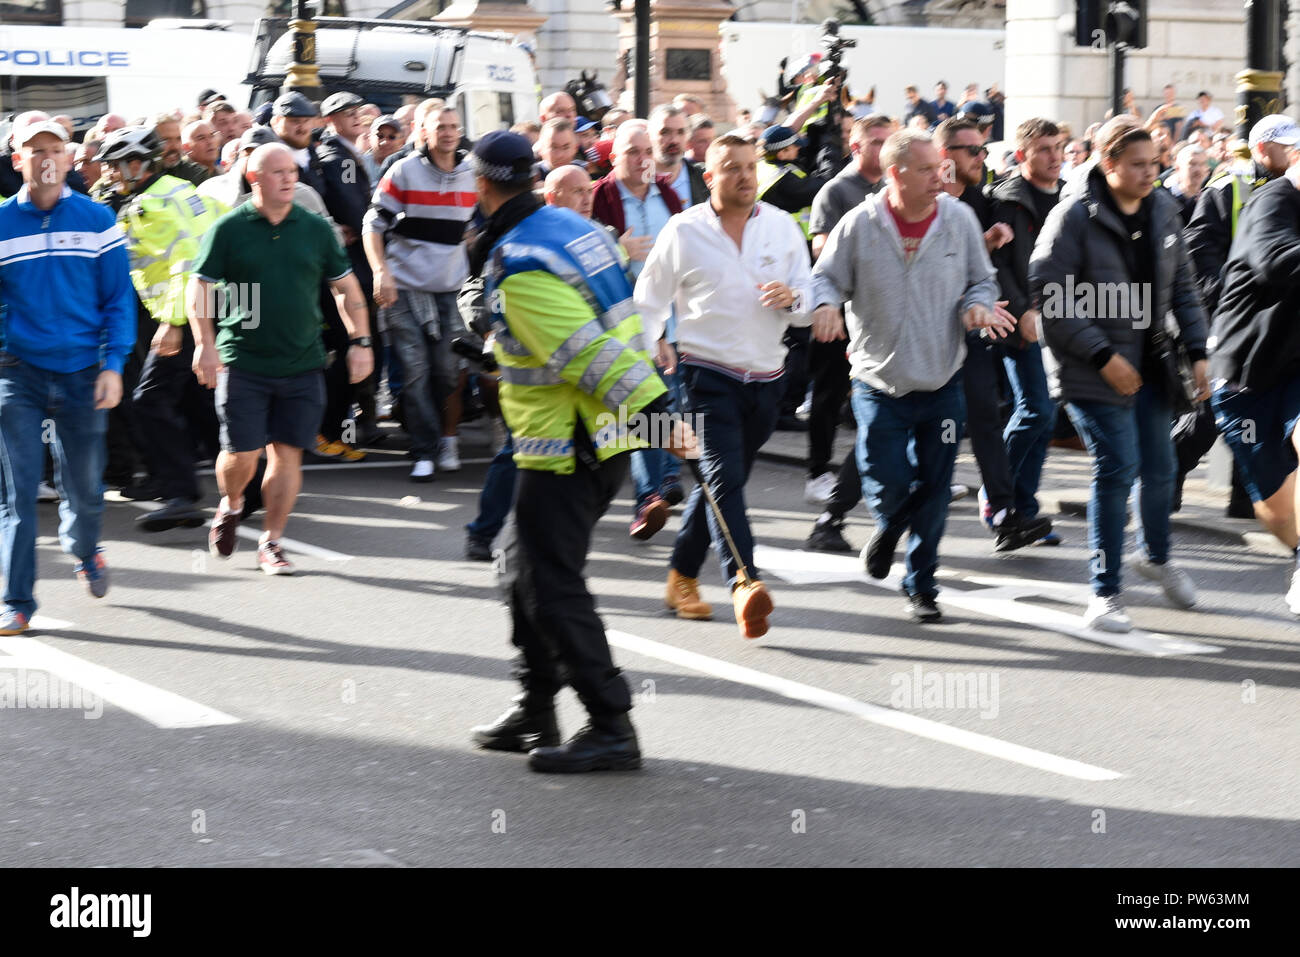 Democratic Football Lads Alliance DFLA marching towards Parliament, London, in protest demonstration. Marchers broke through a police cordon and scuffles took place. Lone officer outnumbered Stock Photo